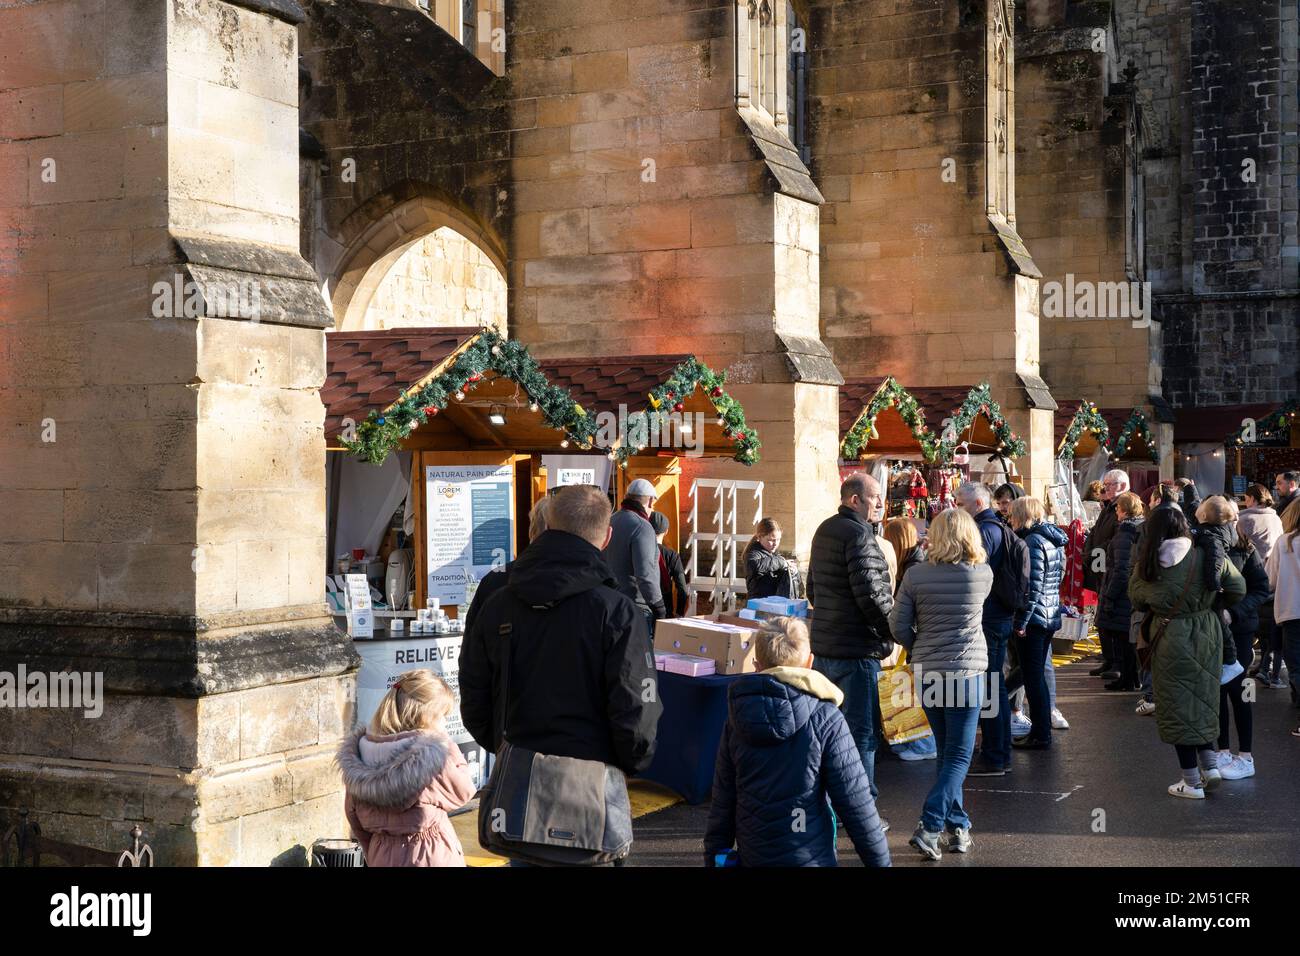 Christmas shoppers at Winchester Christmas market with stalls inbetween stone flying buttresses of Gothic Winchester Cathedral, England, UK Stock Photo